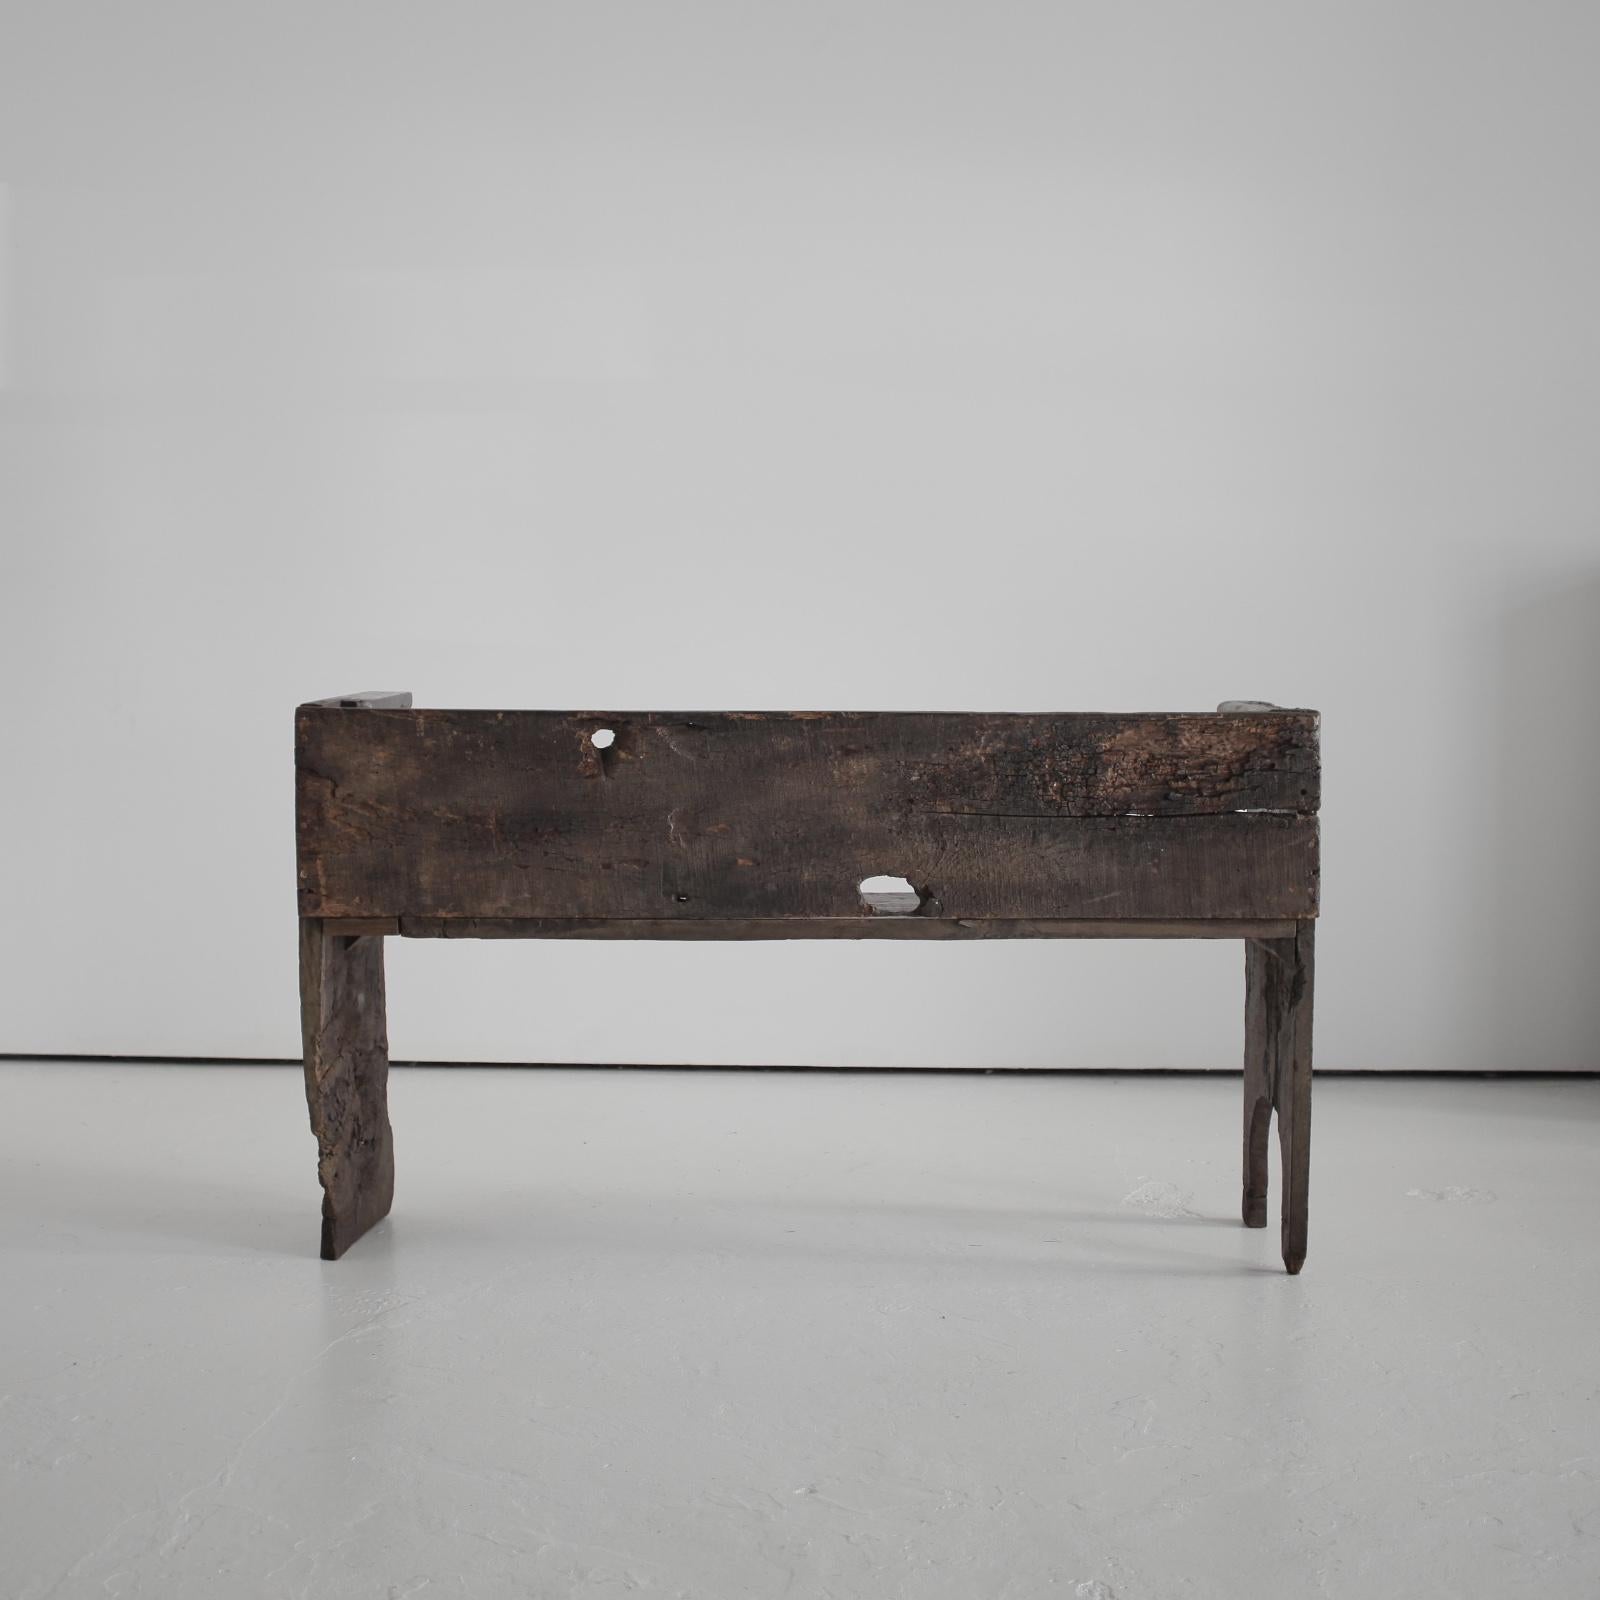 Primitive 17Th C. Galician Bench Wabi Sabi In Good Condition For Sale In London, GB